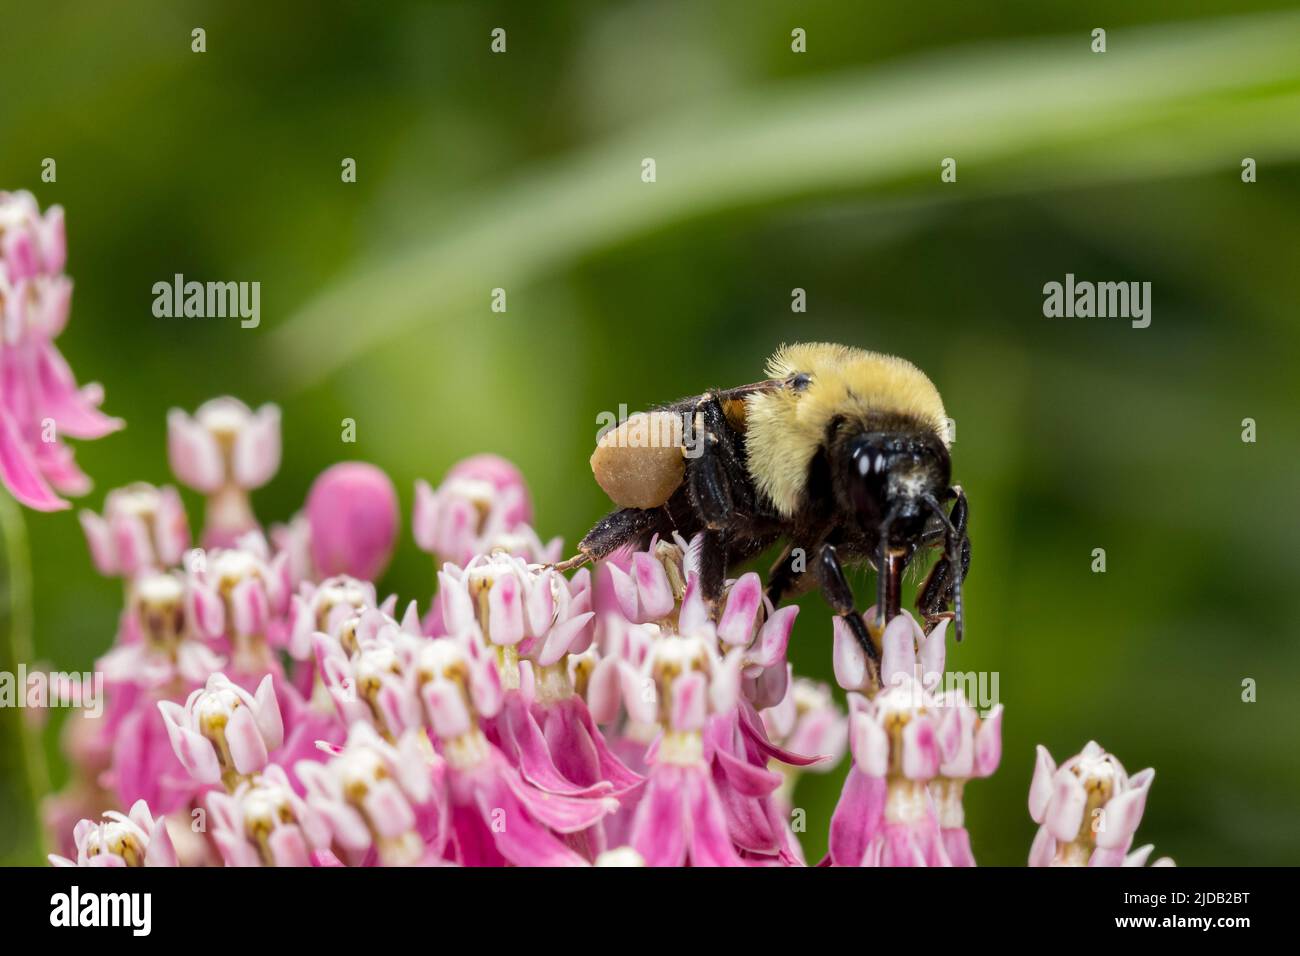 Closeup of pollen basket or sac of Eastern Bumble Bee on swamp milkweed wildflower. Pollination, insect and nature conservation, and backyard flow Stock Photo